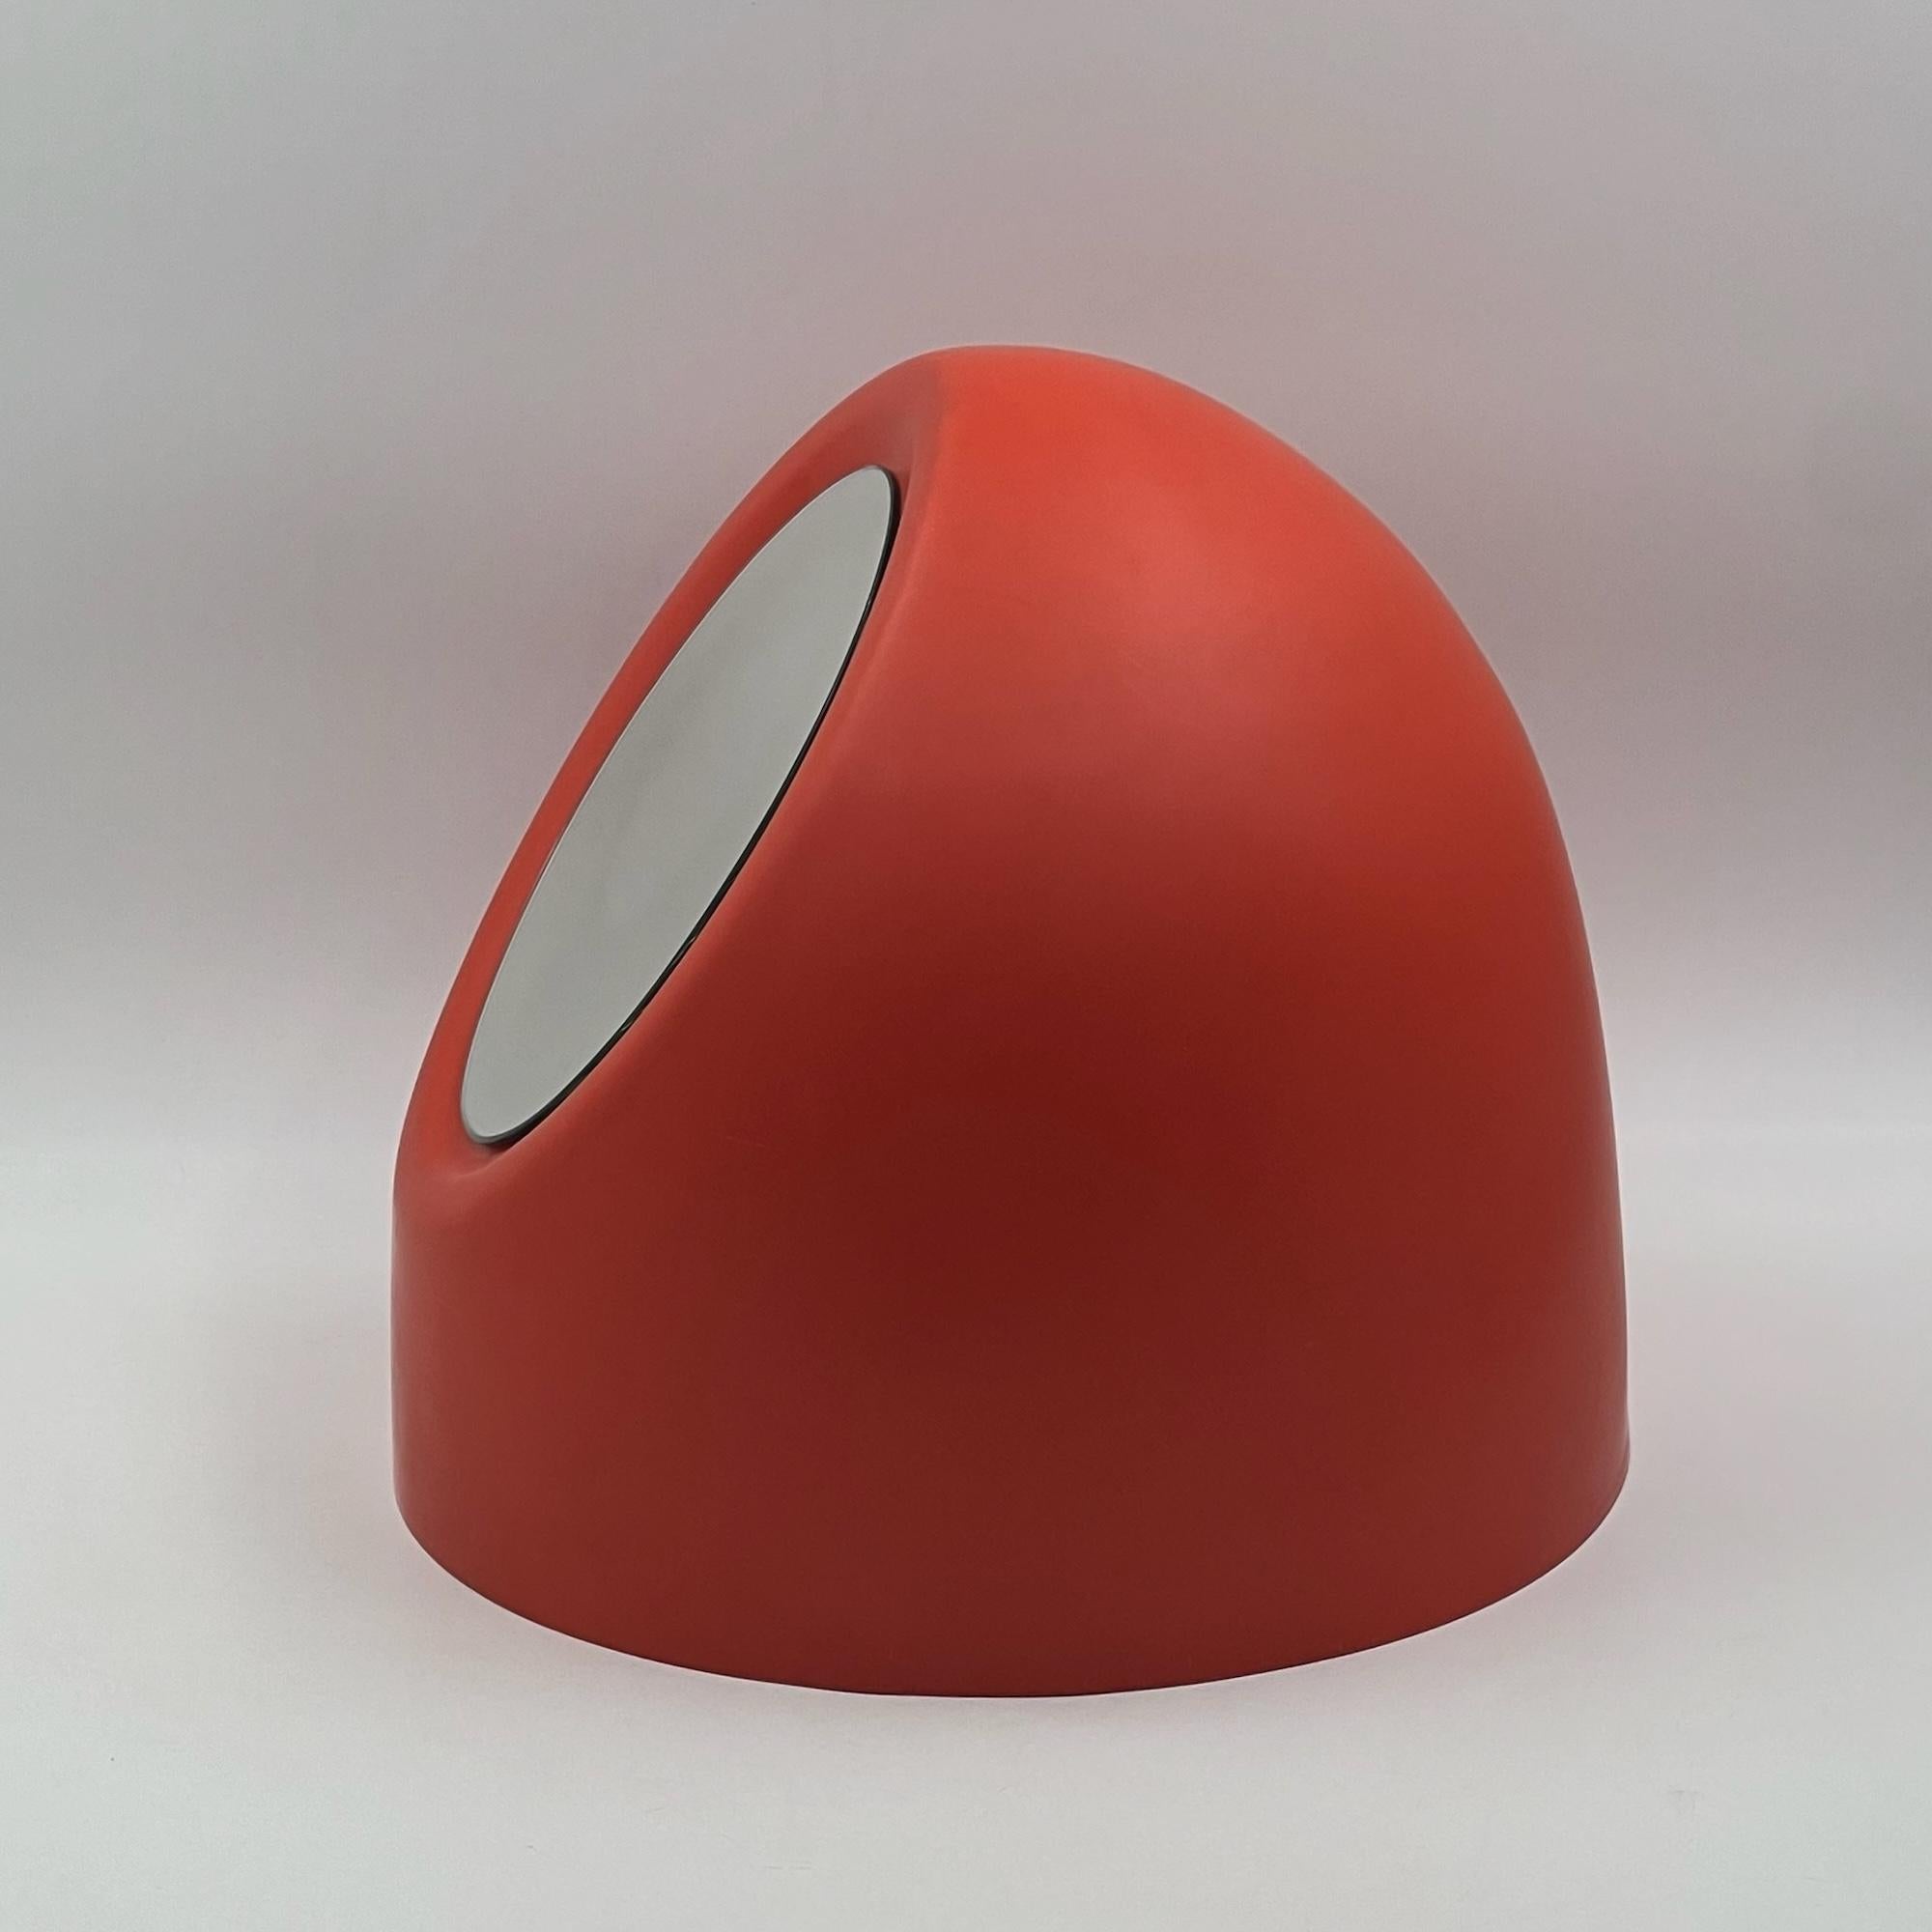 Discover this rare and amazing vintage lipstick table mirror, crafted by Cassina in the 60s, with a distinctive egg-shaped design. This rare find evokes the style of the famous Lipstick mirror by Rodolfo Bonetto, but with softer, more rounded